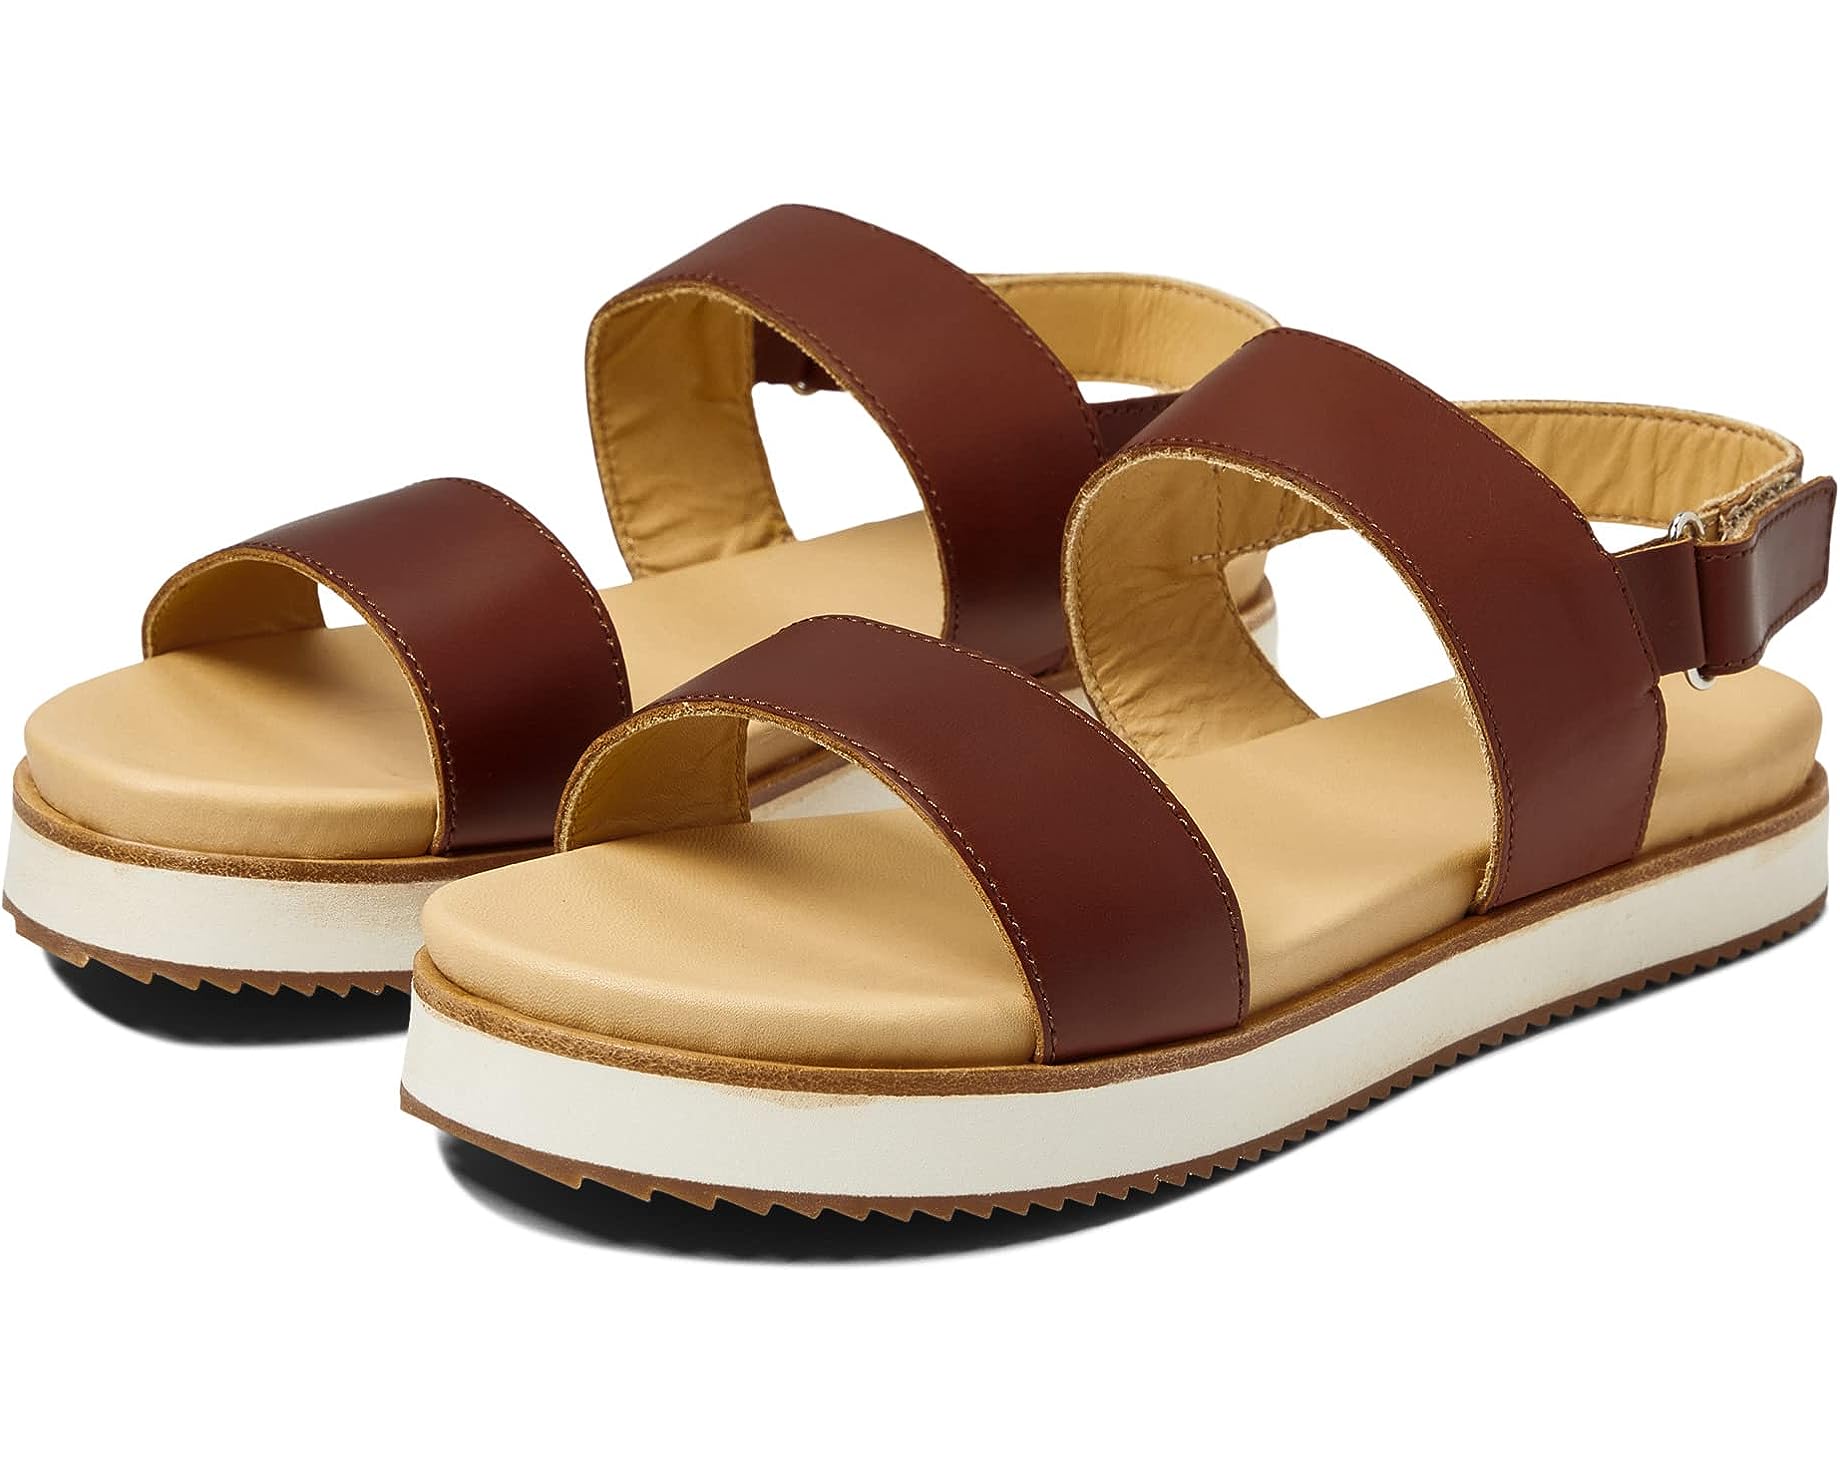 10 Eco-Friendly Sandals From Zappos: Free Shipping On All Orders!